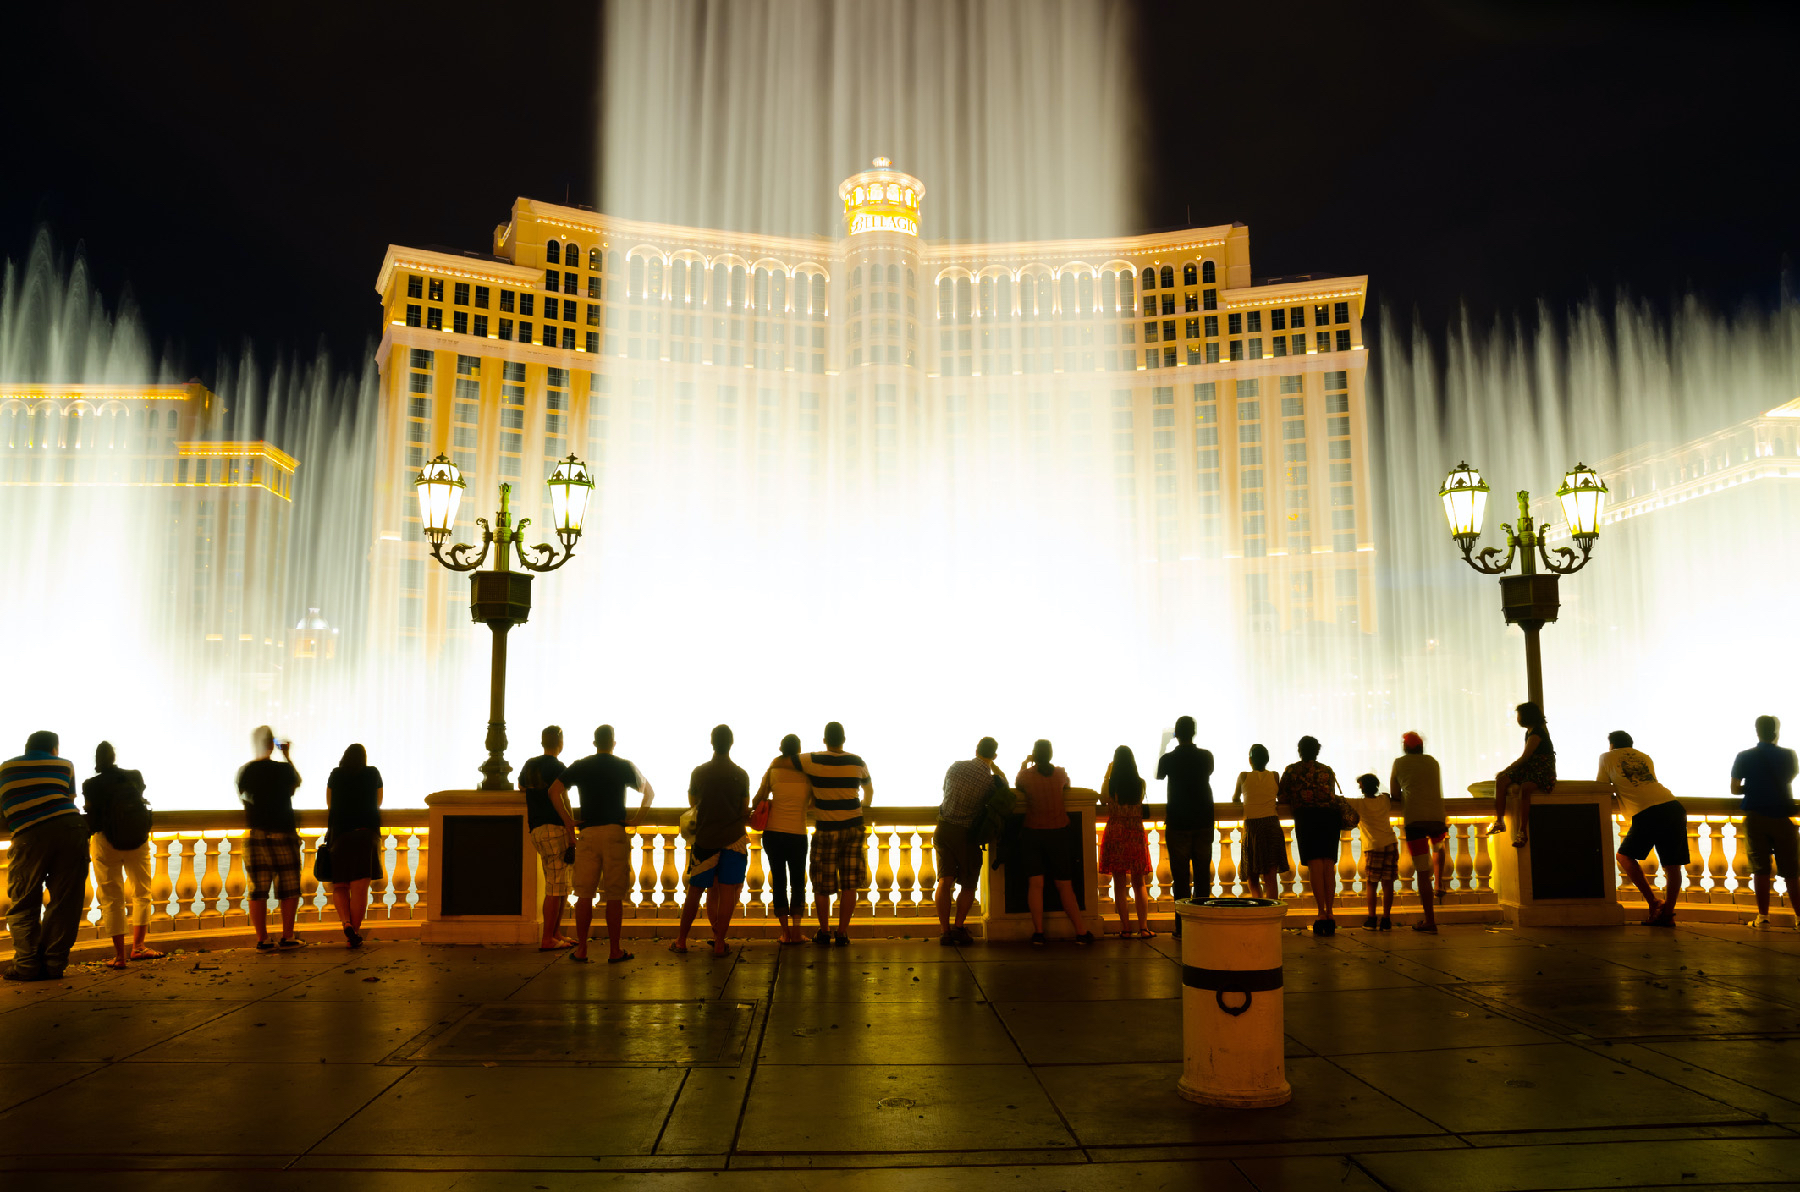 Visitors at the Bellagio Hotel in Las Vegas, Nevada, watch a performance of its iconic fountains